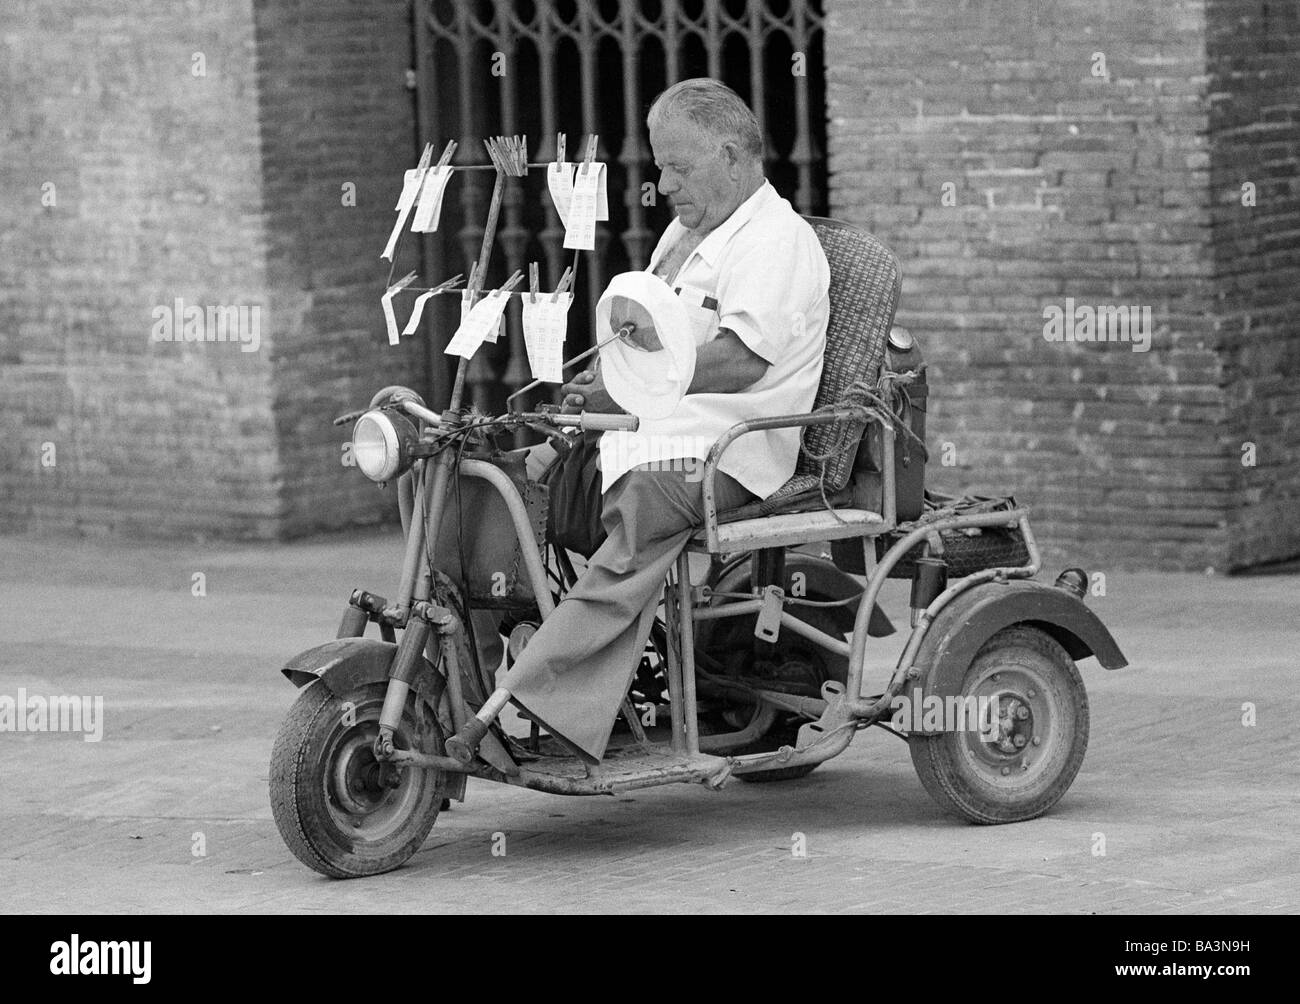 Seventies, black and white photo, people, poorness, gambling, ticket seller on a motorbike, physically handicapped, artificial leg, aged 50 to 70 years, Spain, Valencia Stock Photo